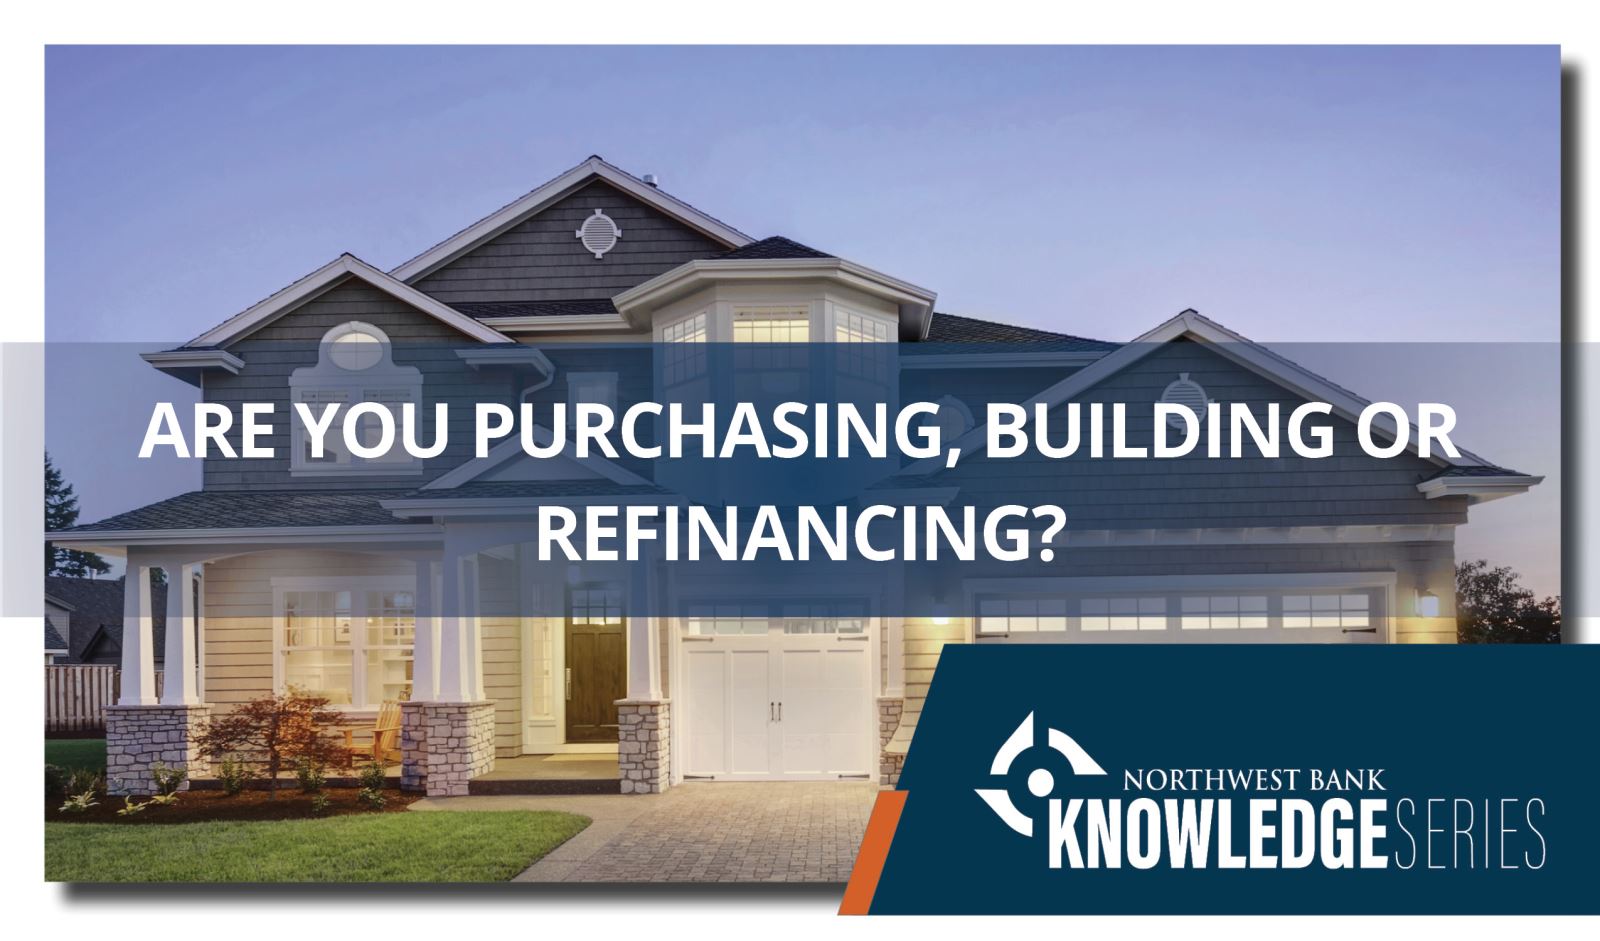 Are you purchasing, building or refinancing?